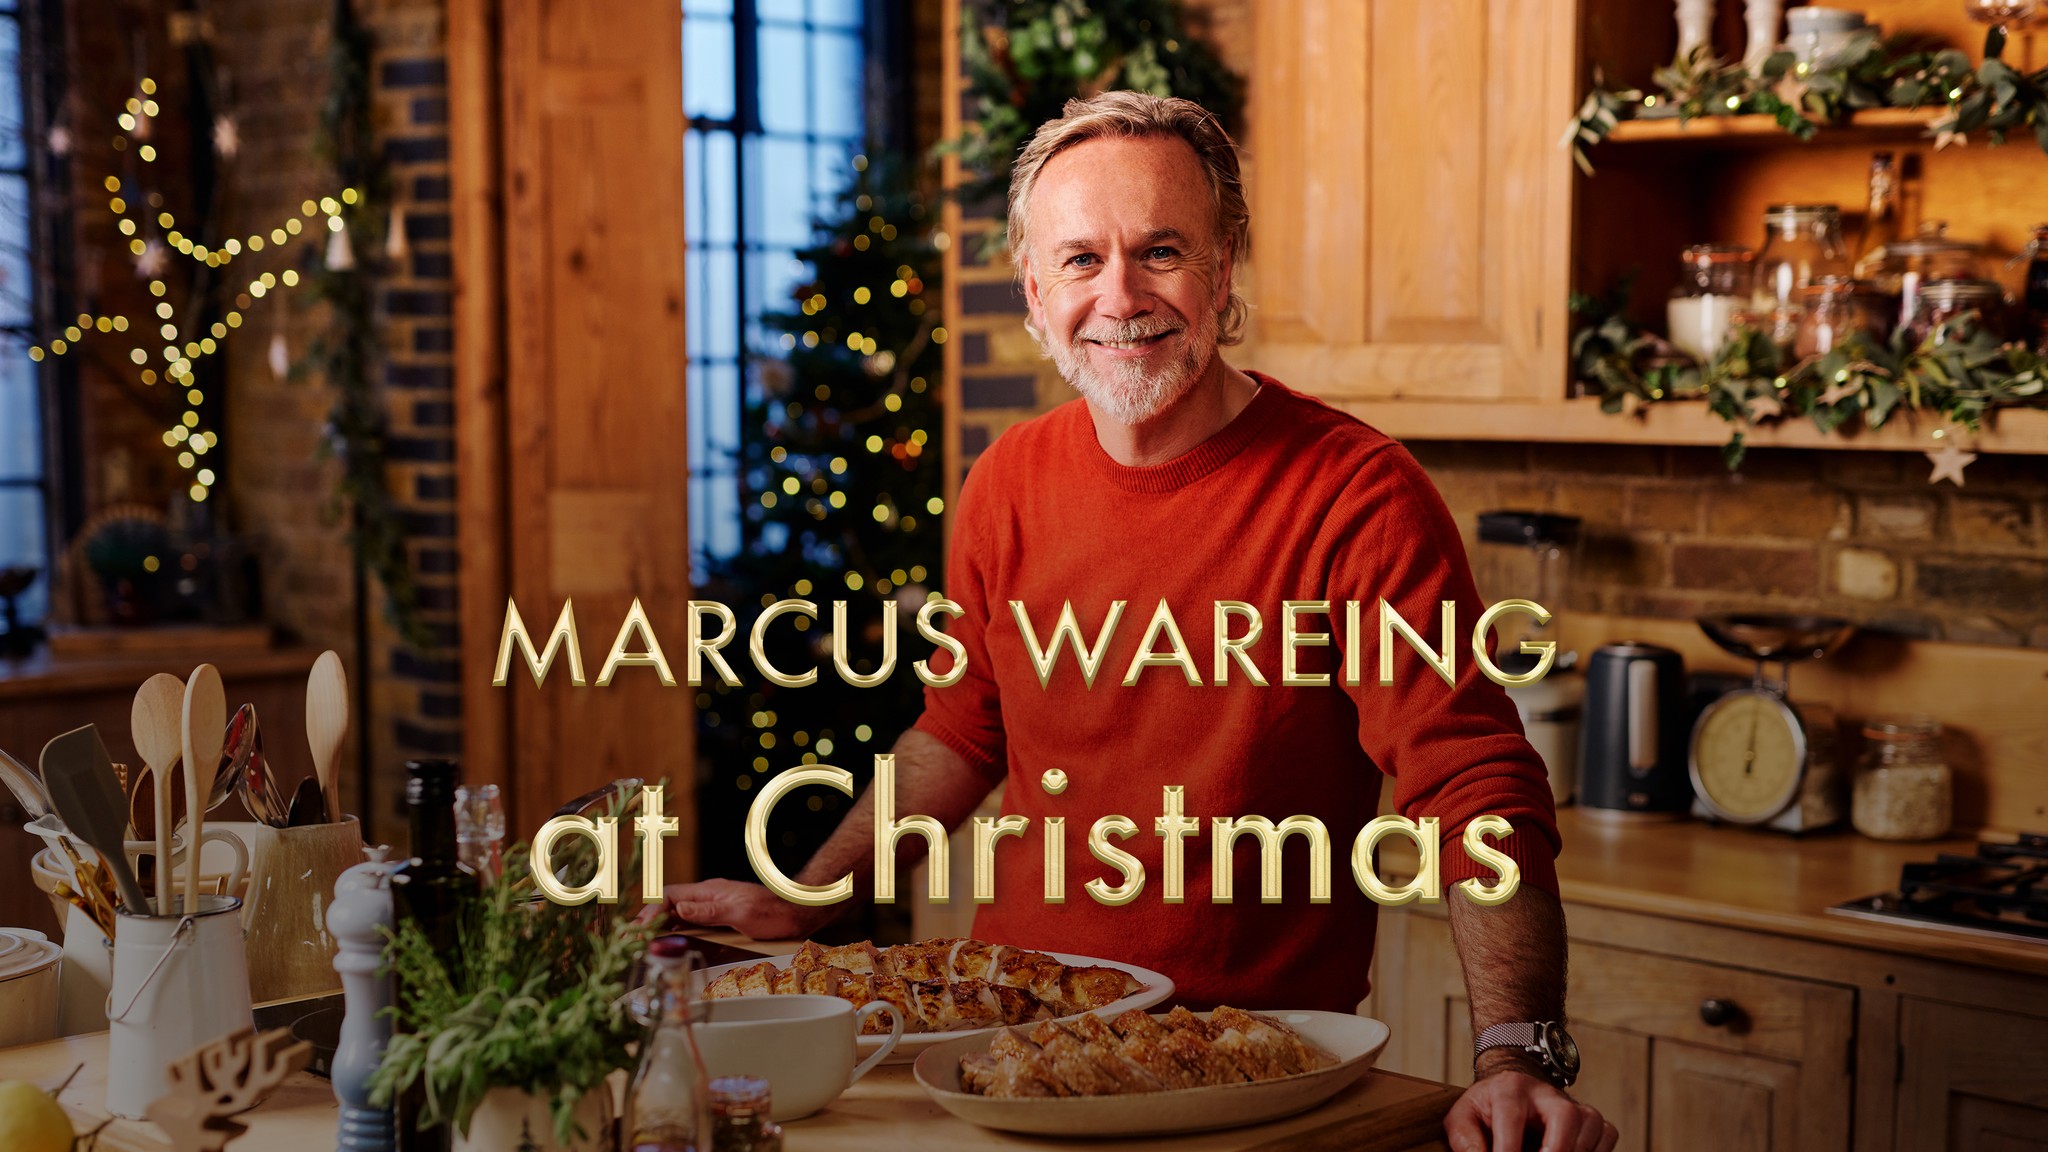 Marcus Wareing in a kitchen wearing a red jumper with words 'Marcus Wareing at Christmas' overlaid